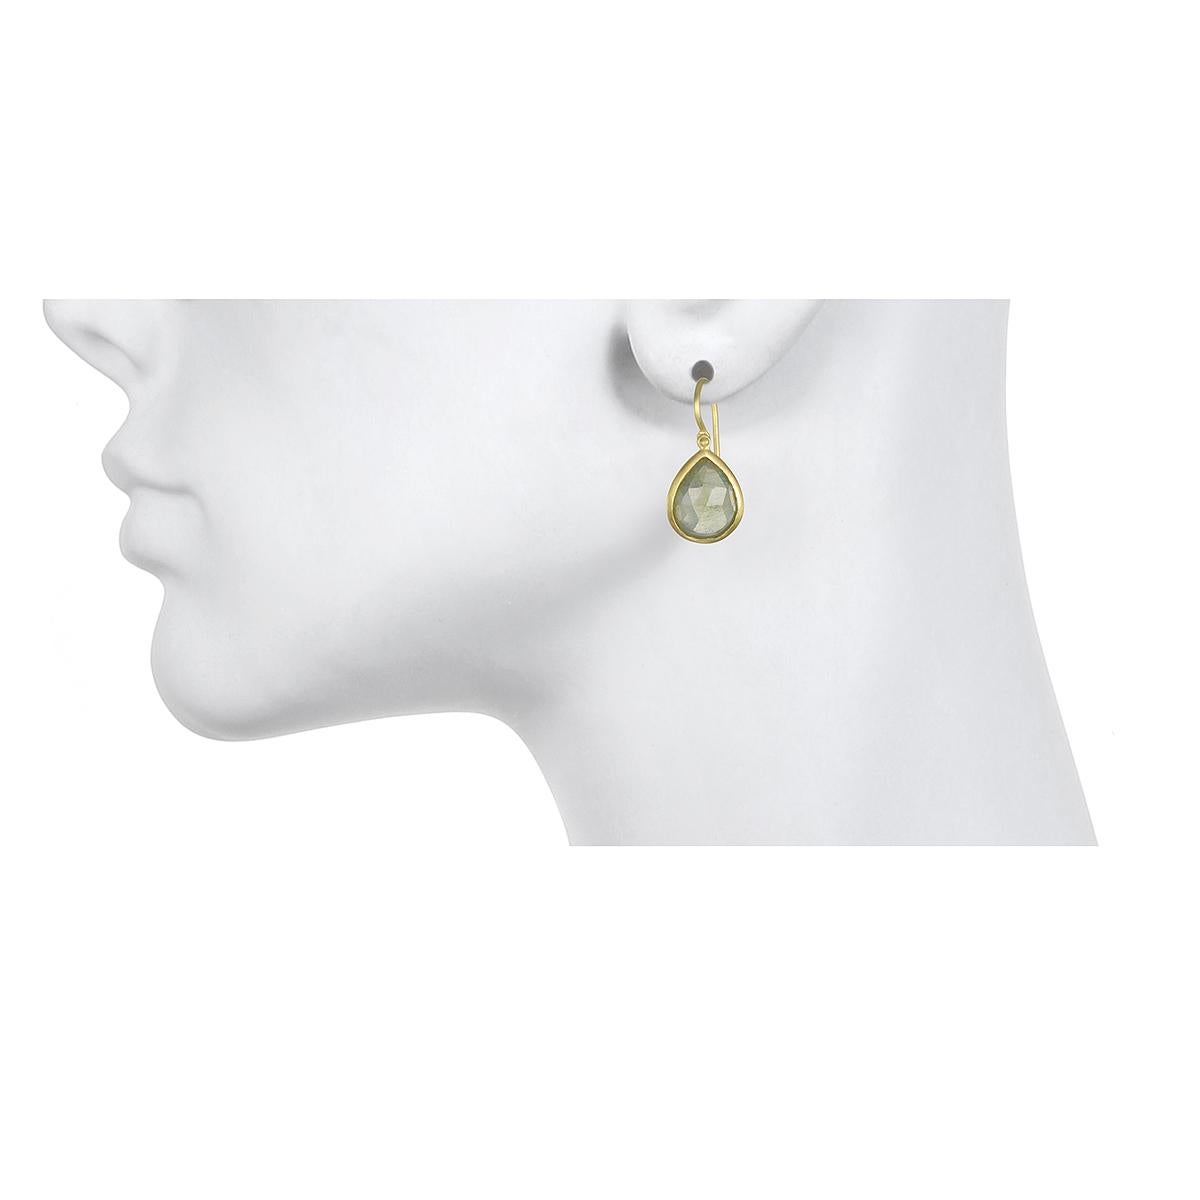 Simple, elegant, and beautiful! Handcrafted in 18k gold